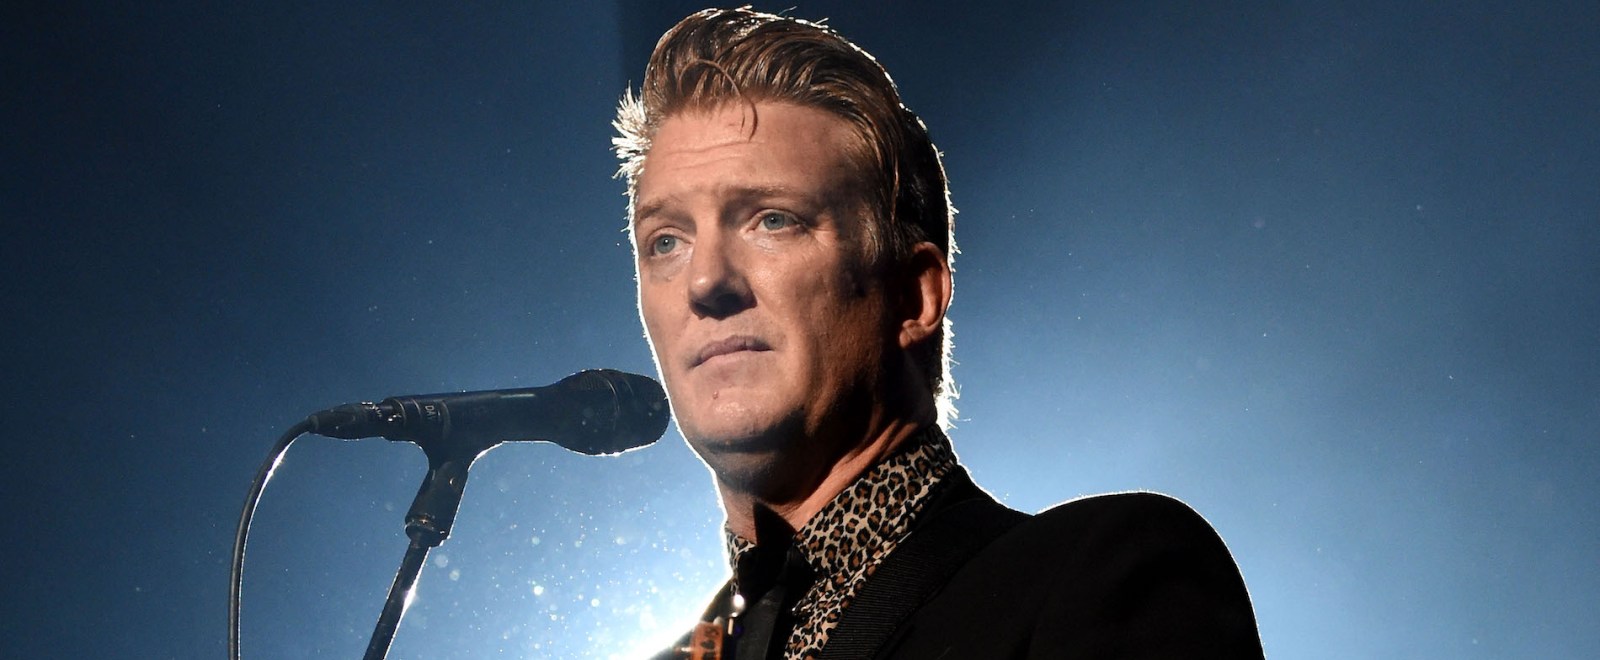 josh-homme-queens-of-the-stone-age-getty-full.jpg